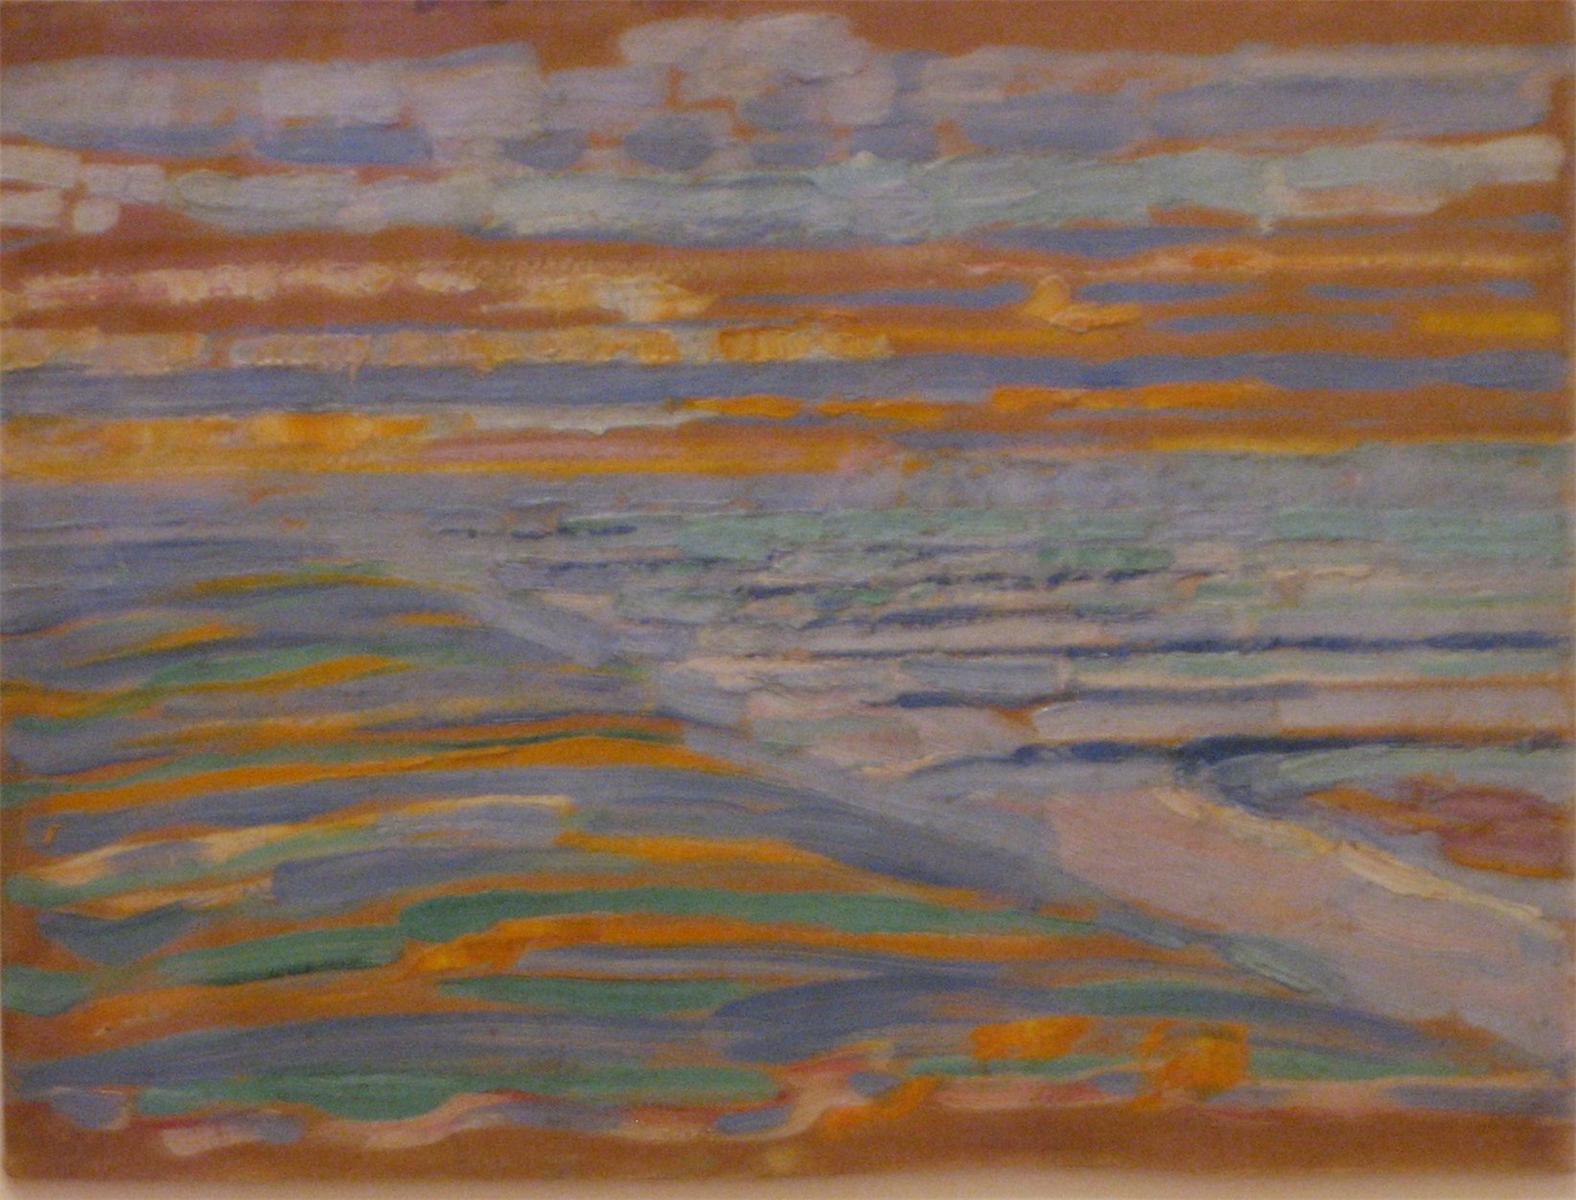 View from the Dunes with Beach and Piers by Piet Mondrian - 1909 - 28.5 x 38.5 cm Museum of Modern Art